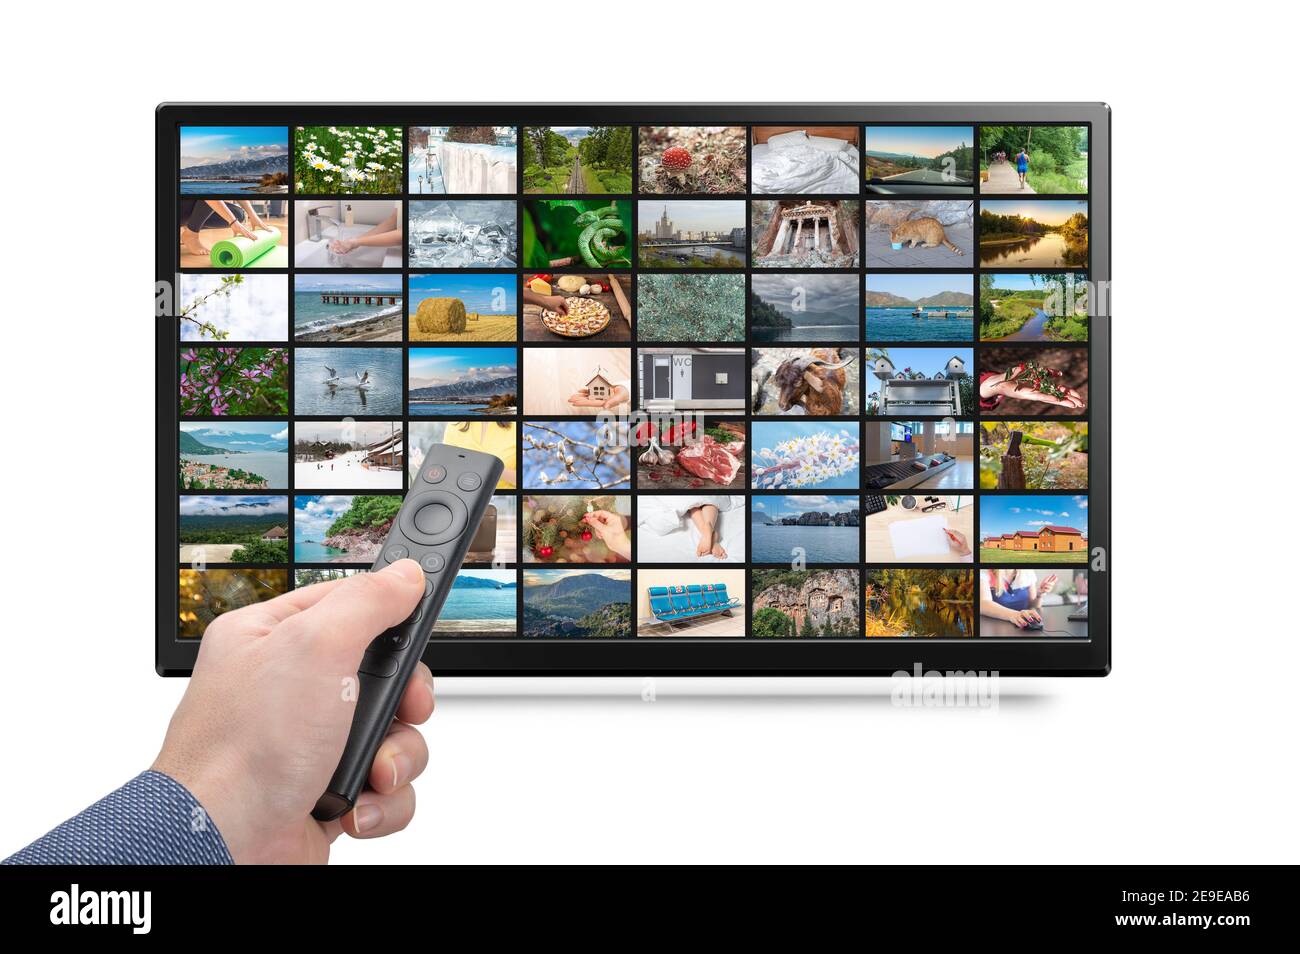 Online TV, Streaming VOD service concept. Male hand holding TV remote control. Television streaming video